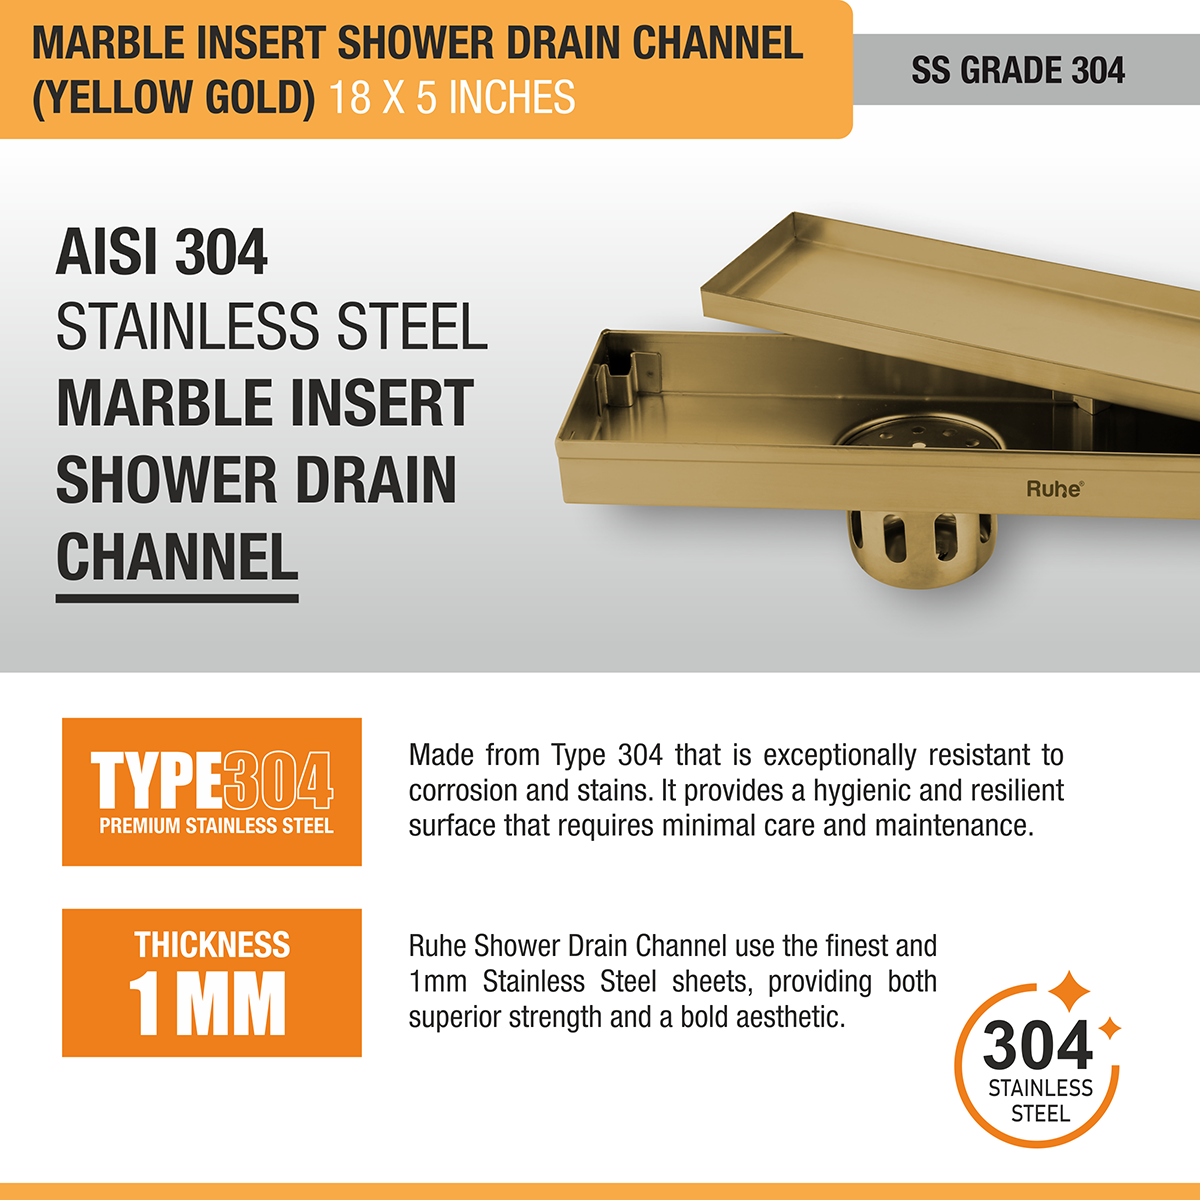 Marble Insert Shower Drain Channel (18 x 5 Inches) YELLOW GOLD PVD Coated stainless steel